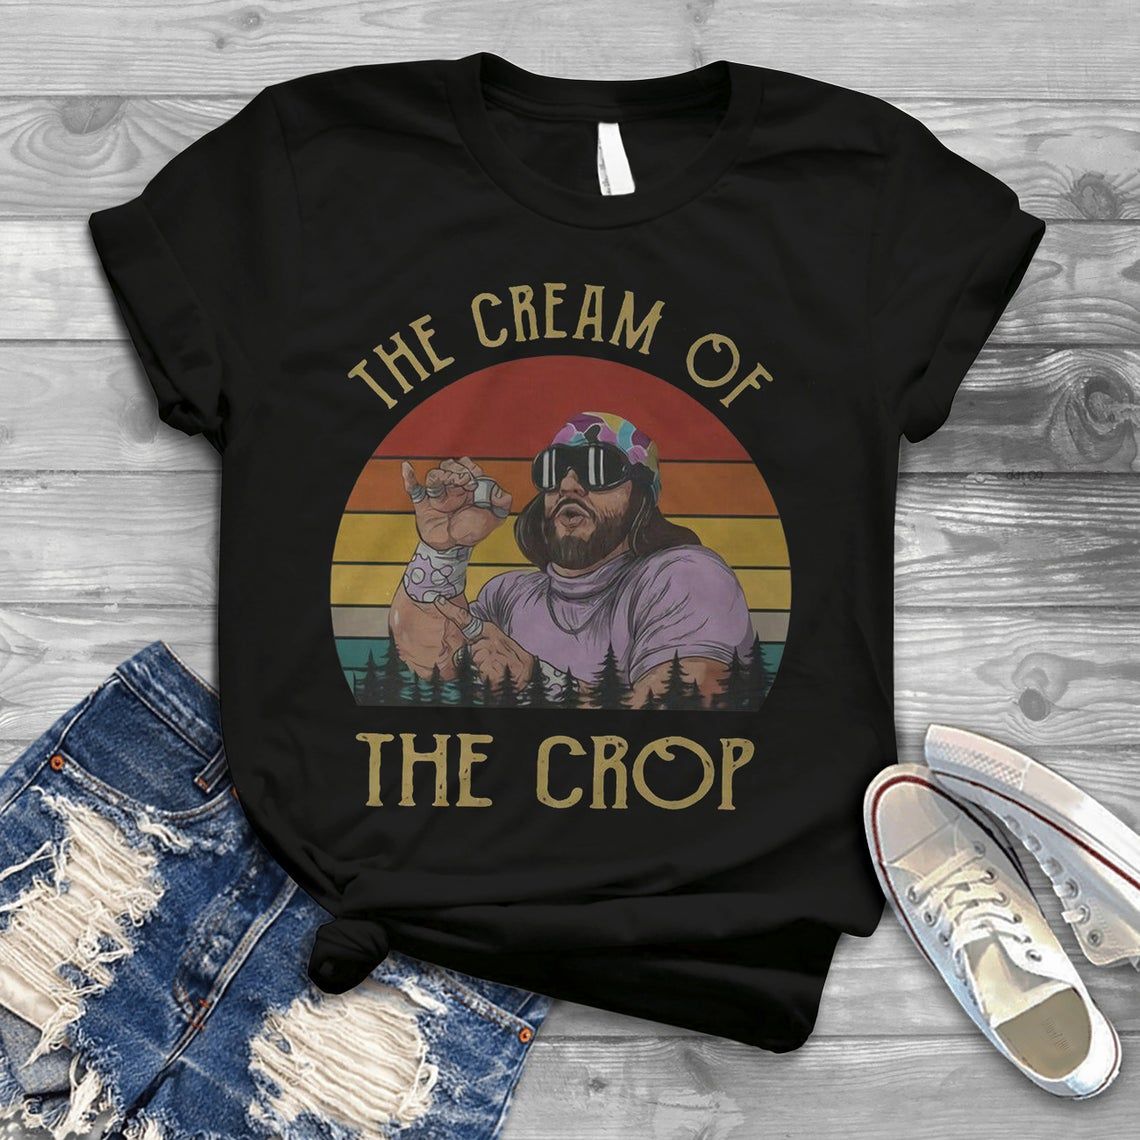 Macho Savage The Cream of The Crop Vintage Shirt Style: Unisex T-shirt, Color: Black